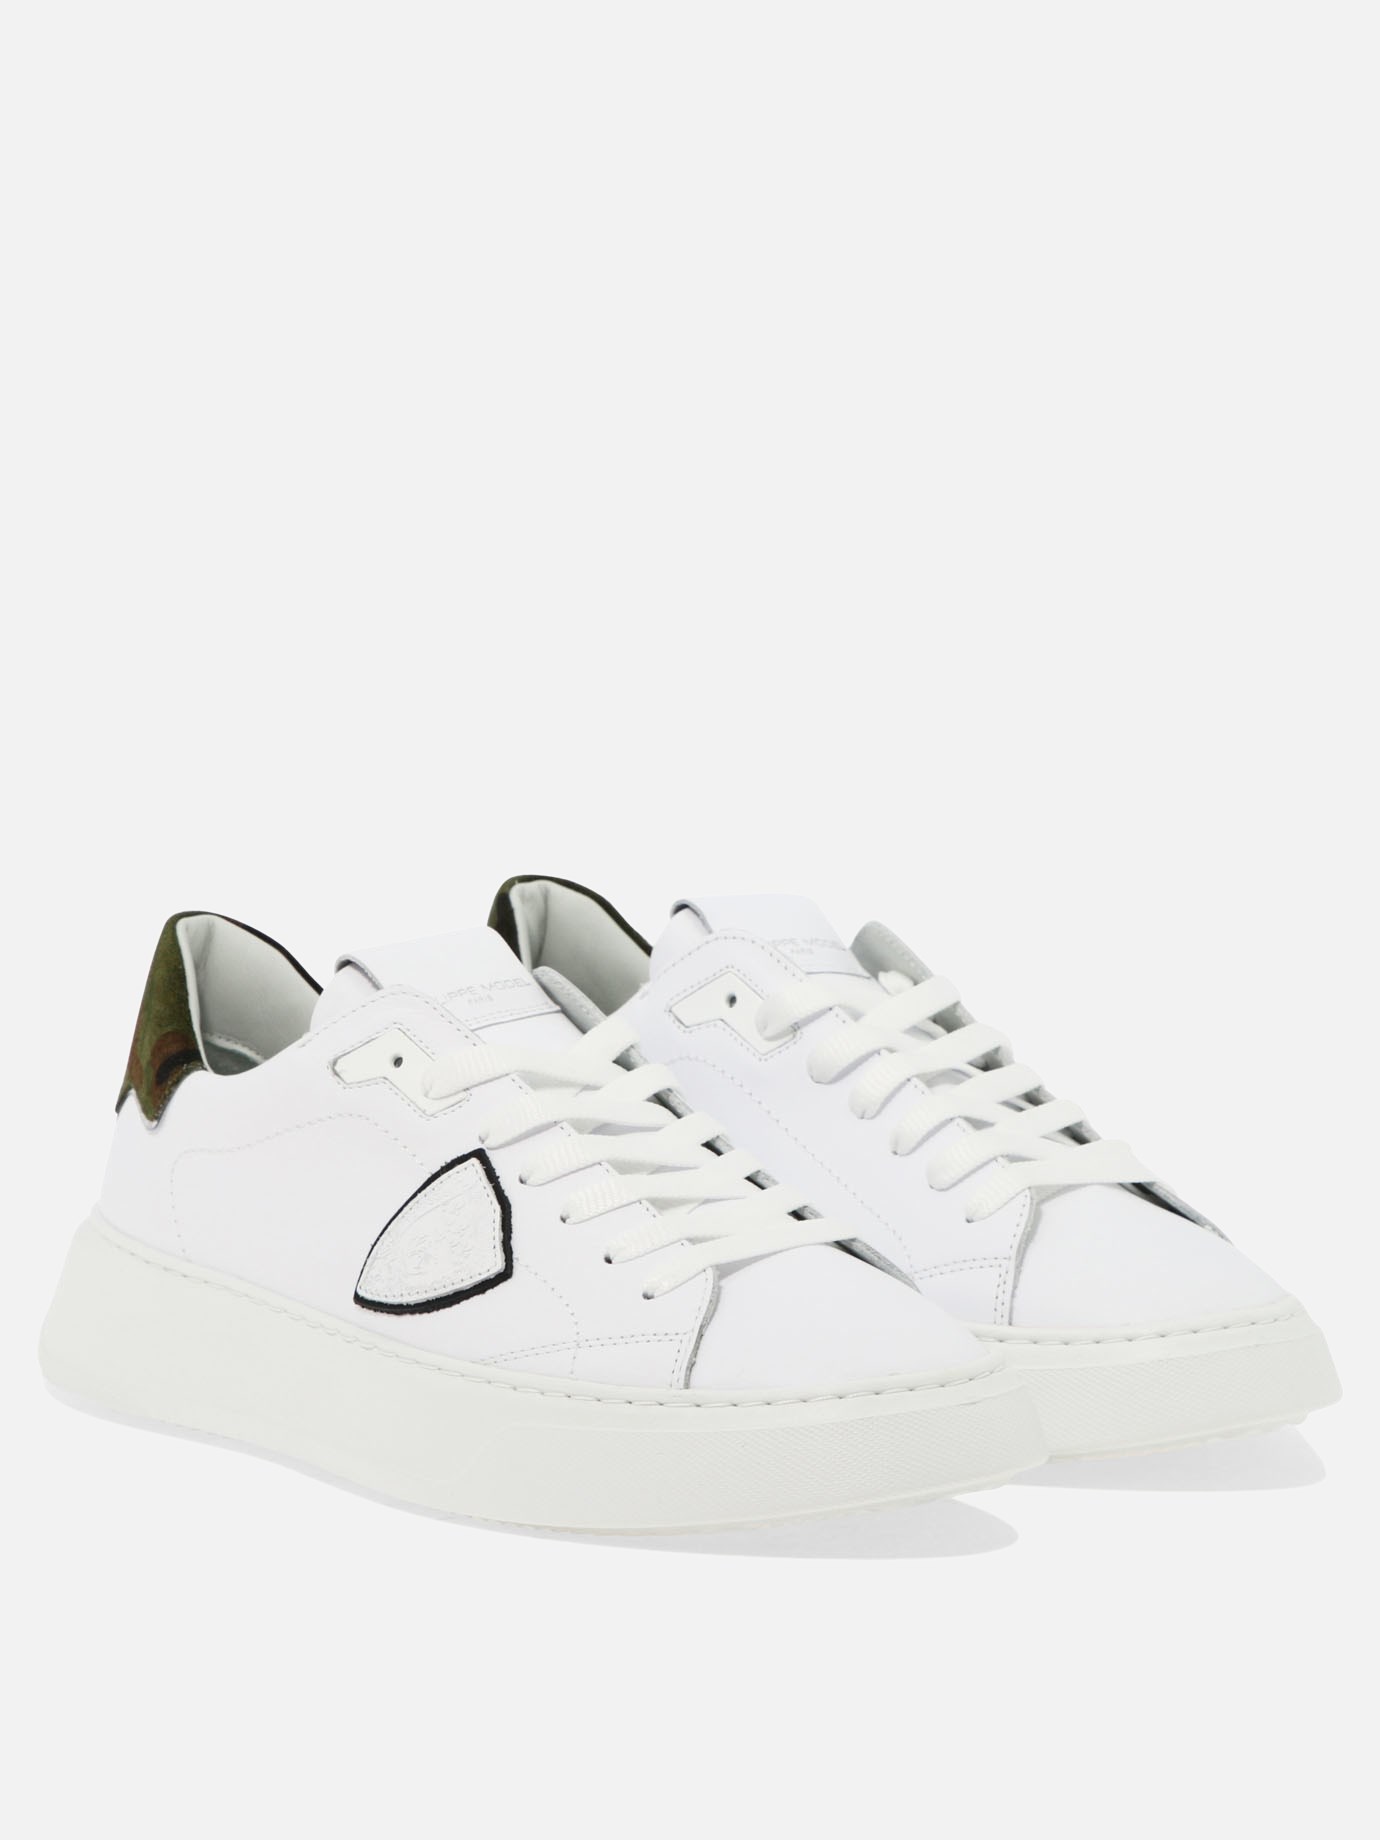  Temple  sneakers by Philippe Model Paris